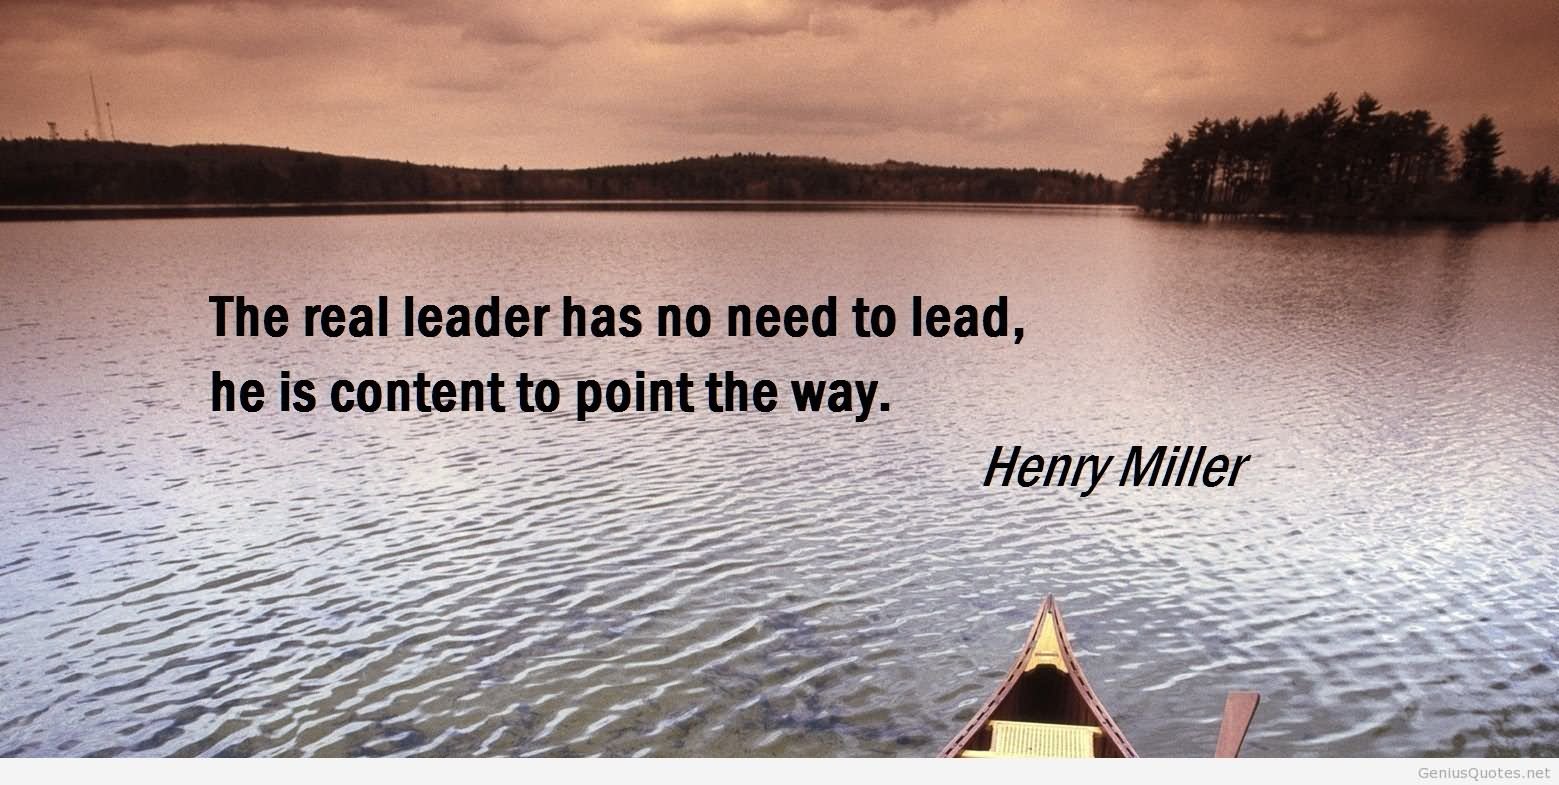 The real leader has no need to lead – he is content to point the way.